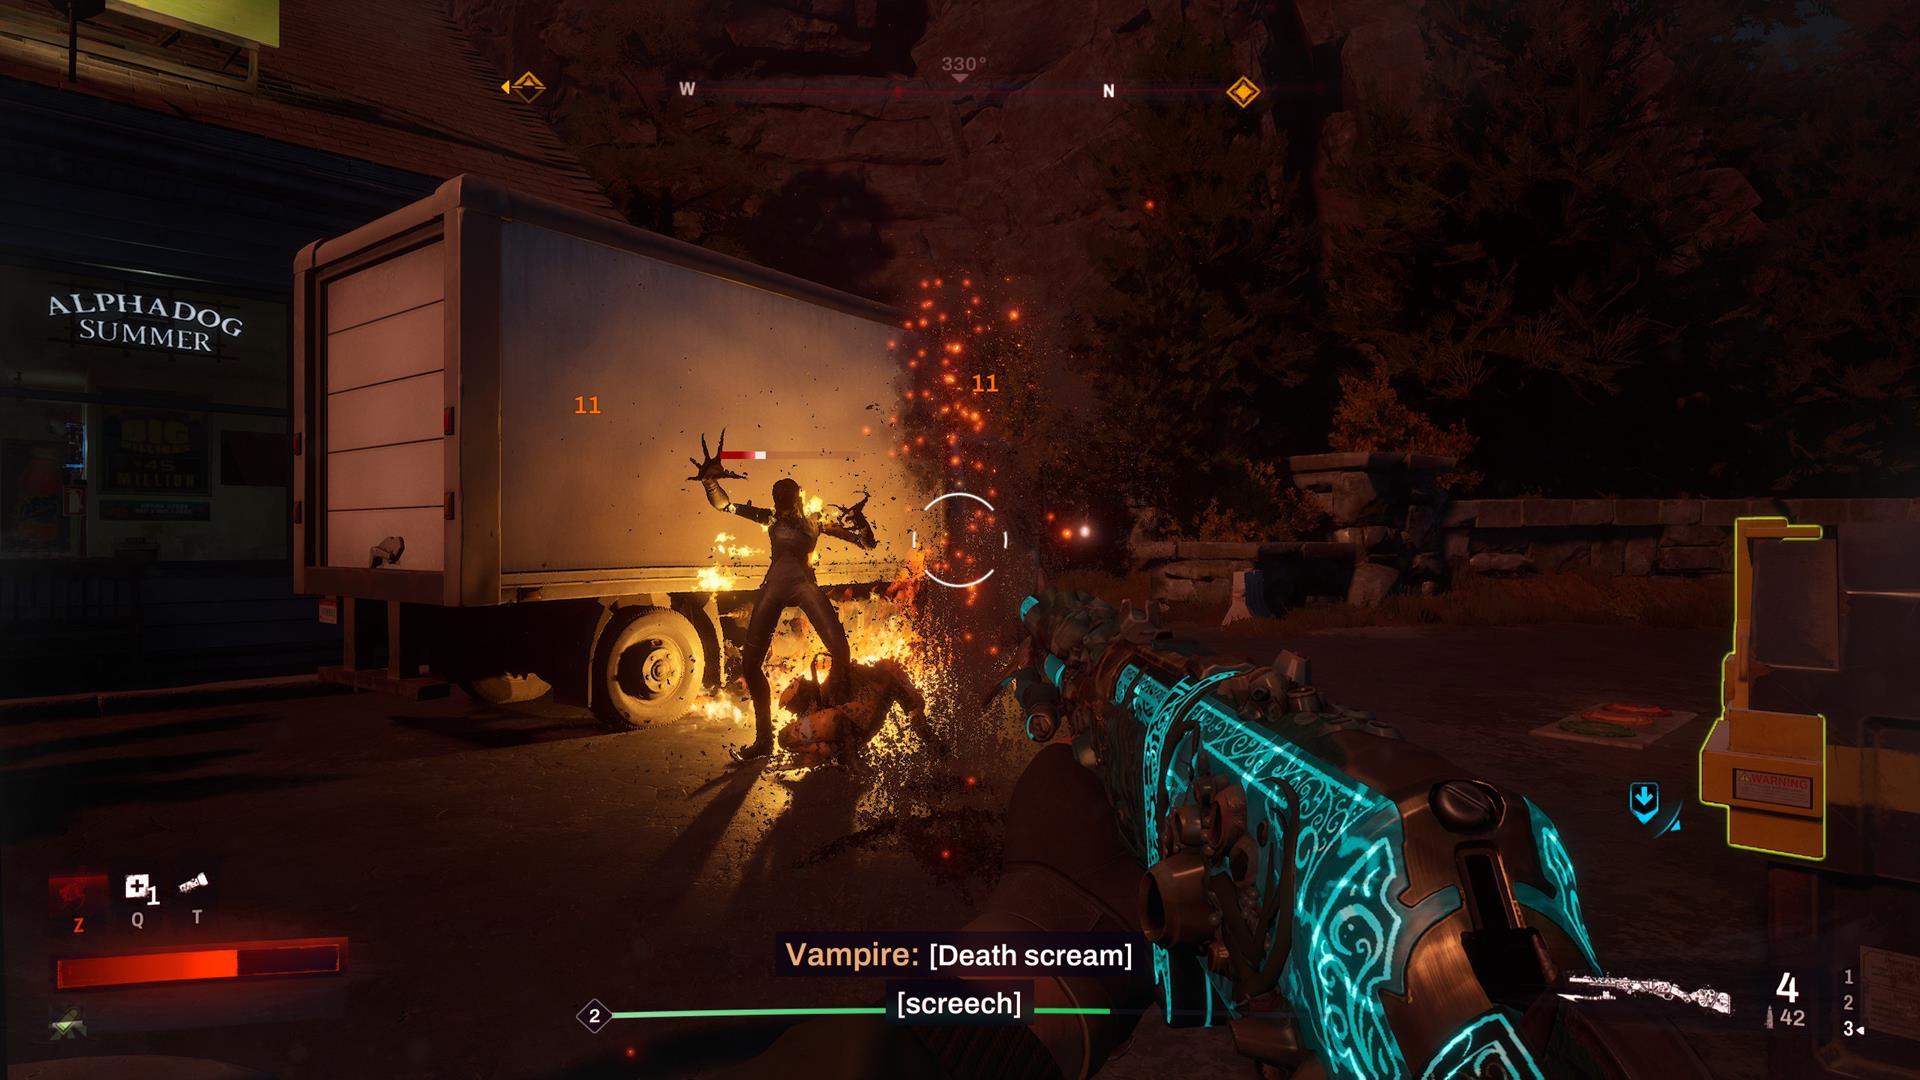 Redfall weapons: a first-person view of a character wielding a glowing blue shotgun while opening fire on enemies.